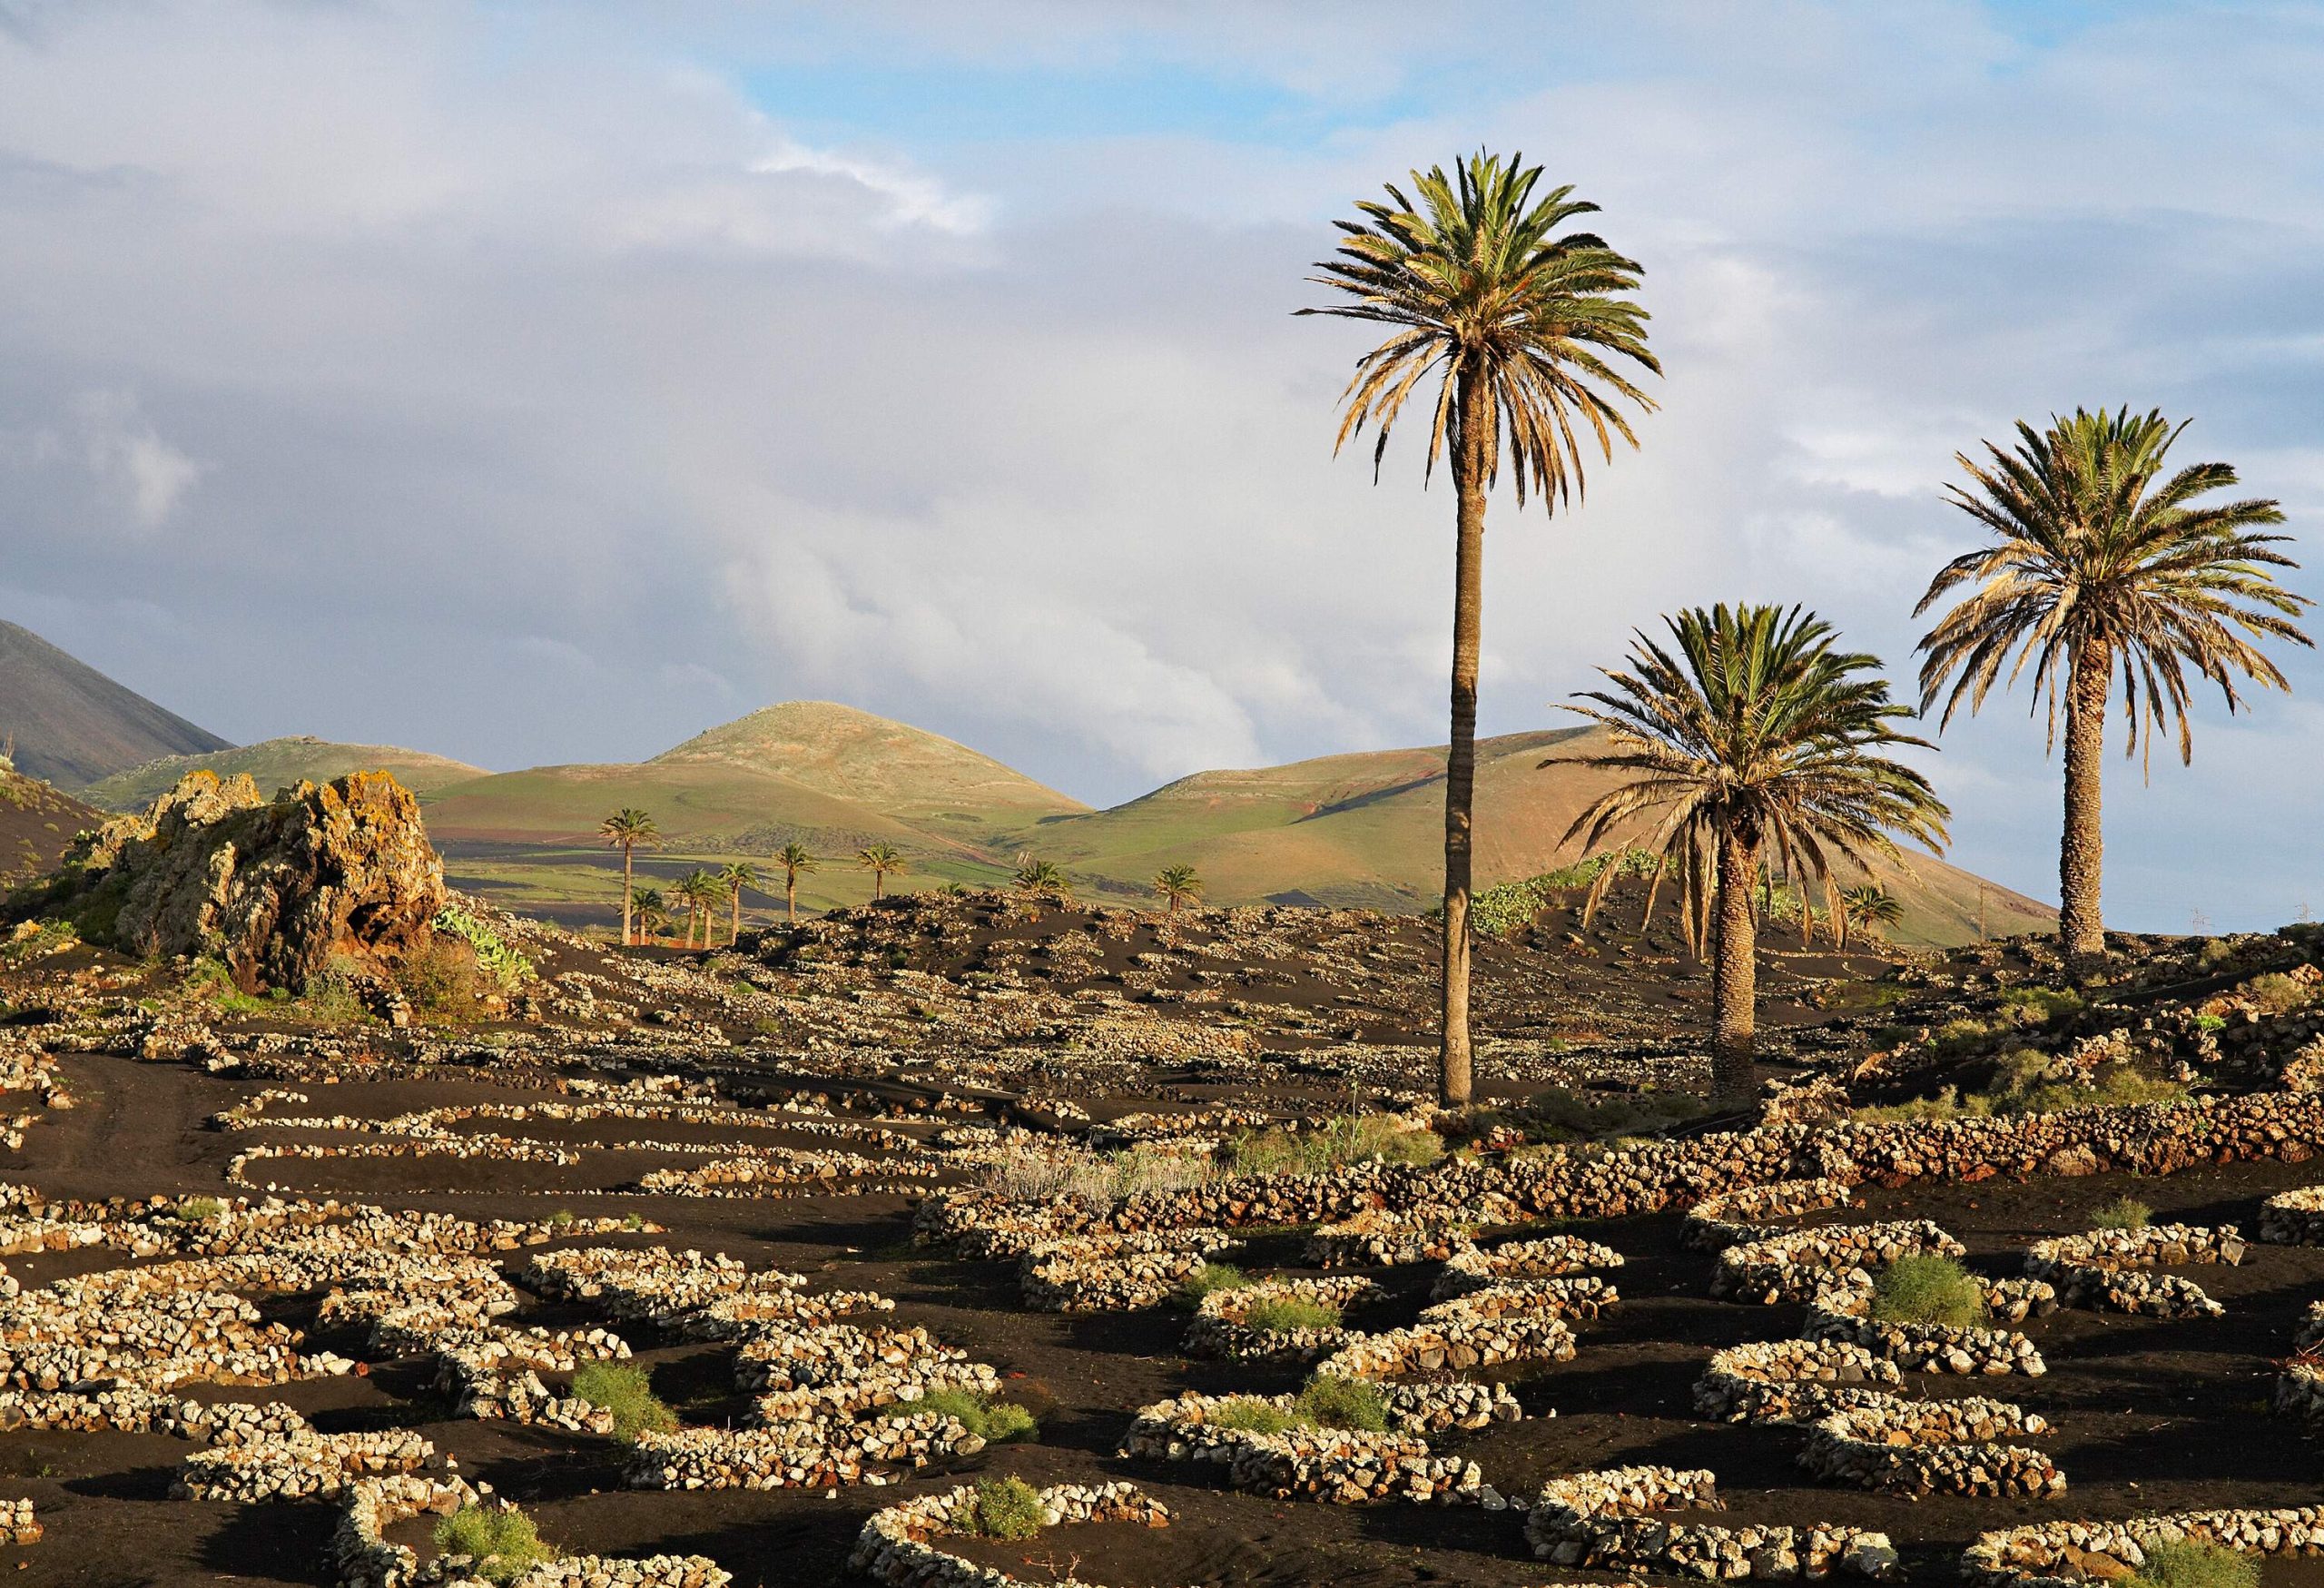 Three palm trees stand beside a field of plants growing inside the crater-like hollows on fertile grounds.